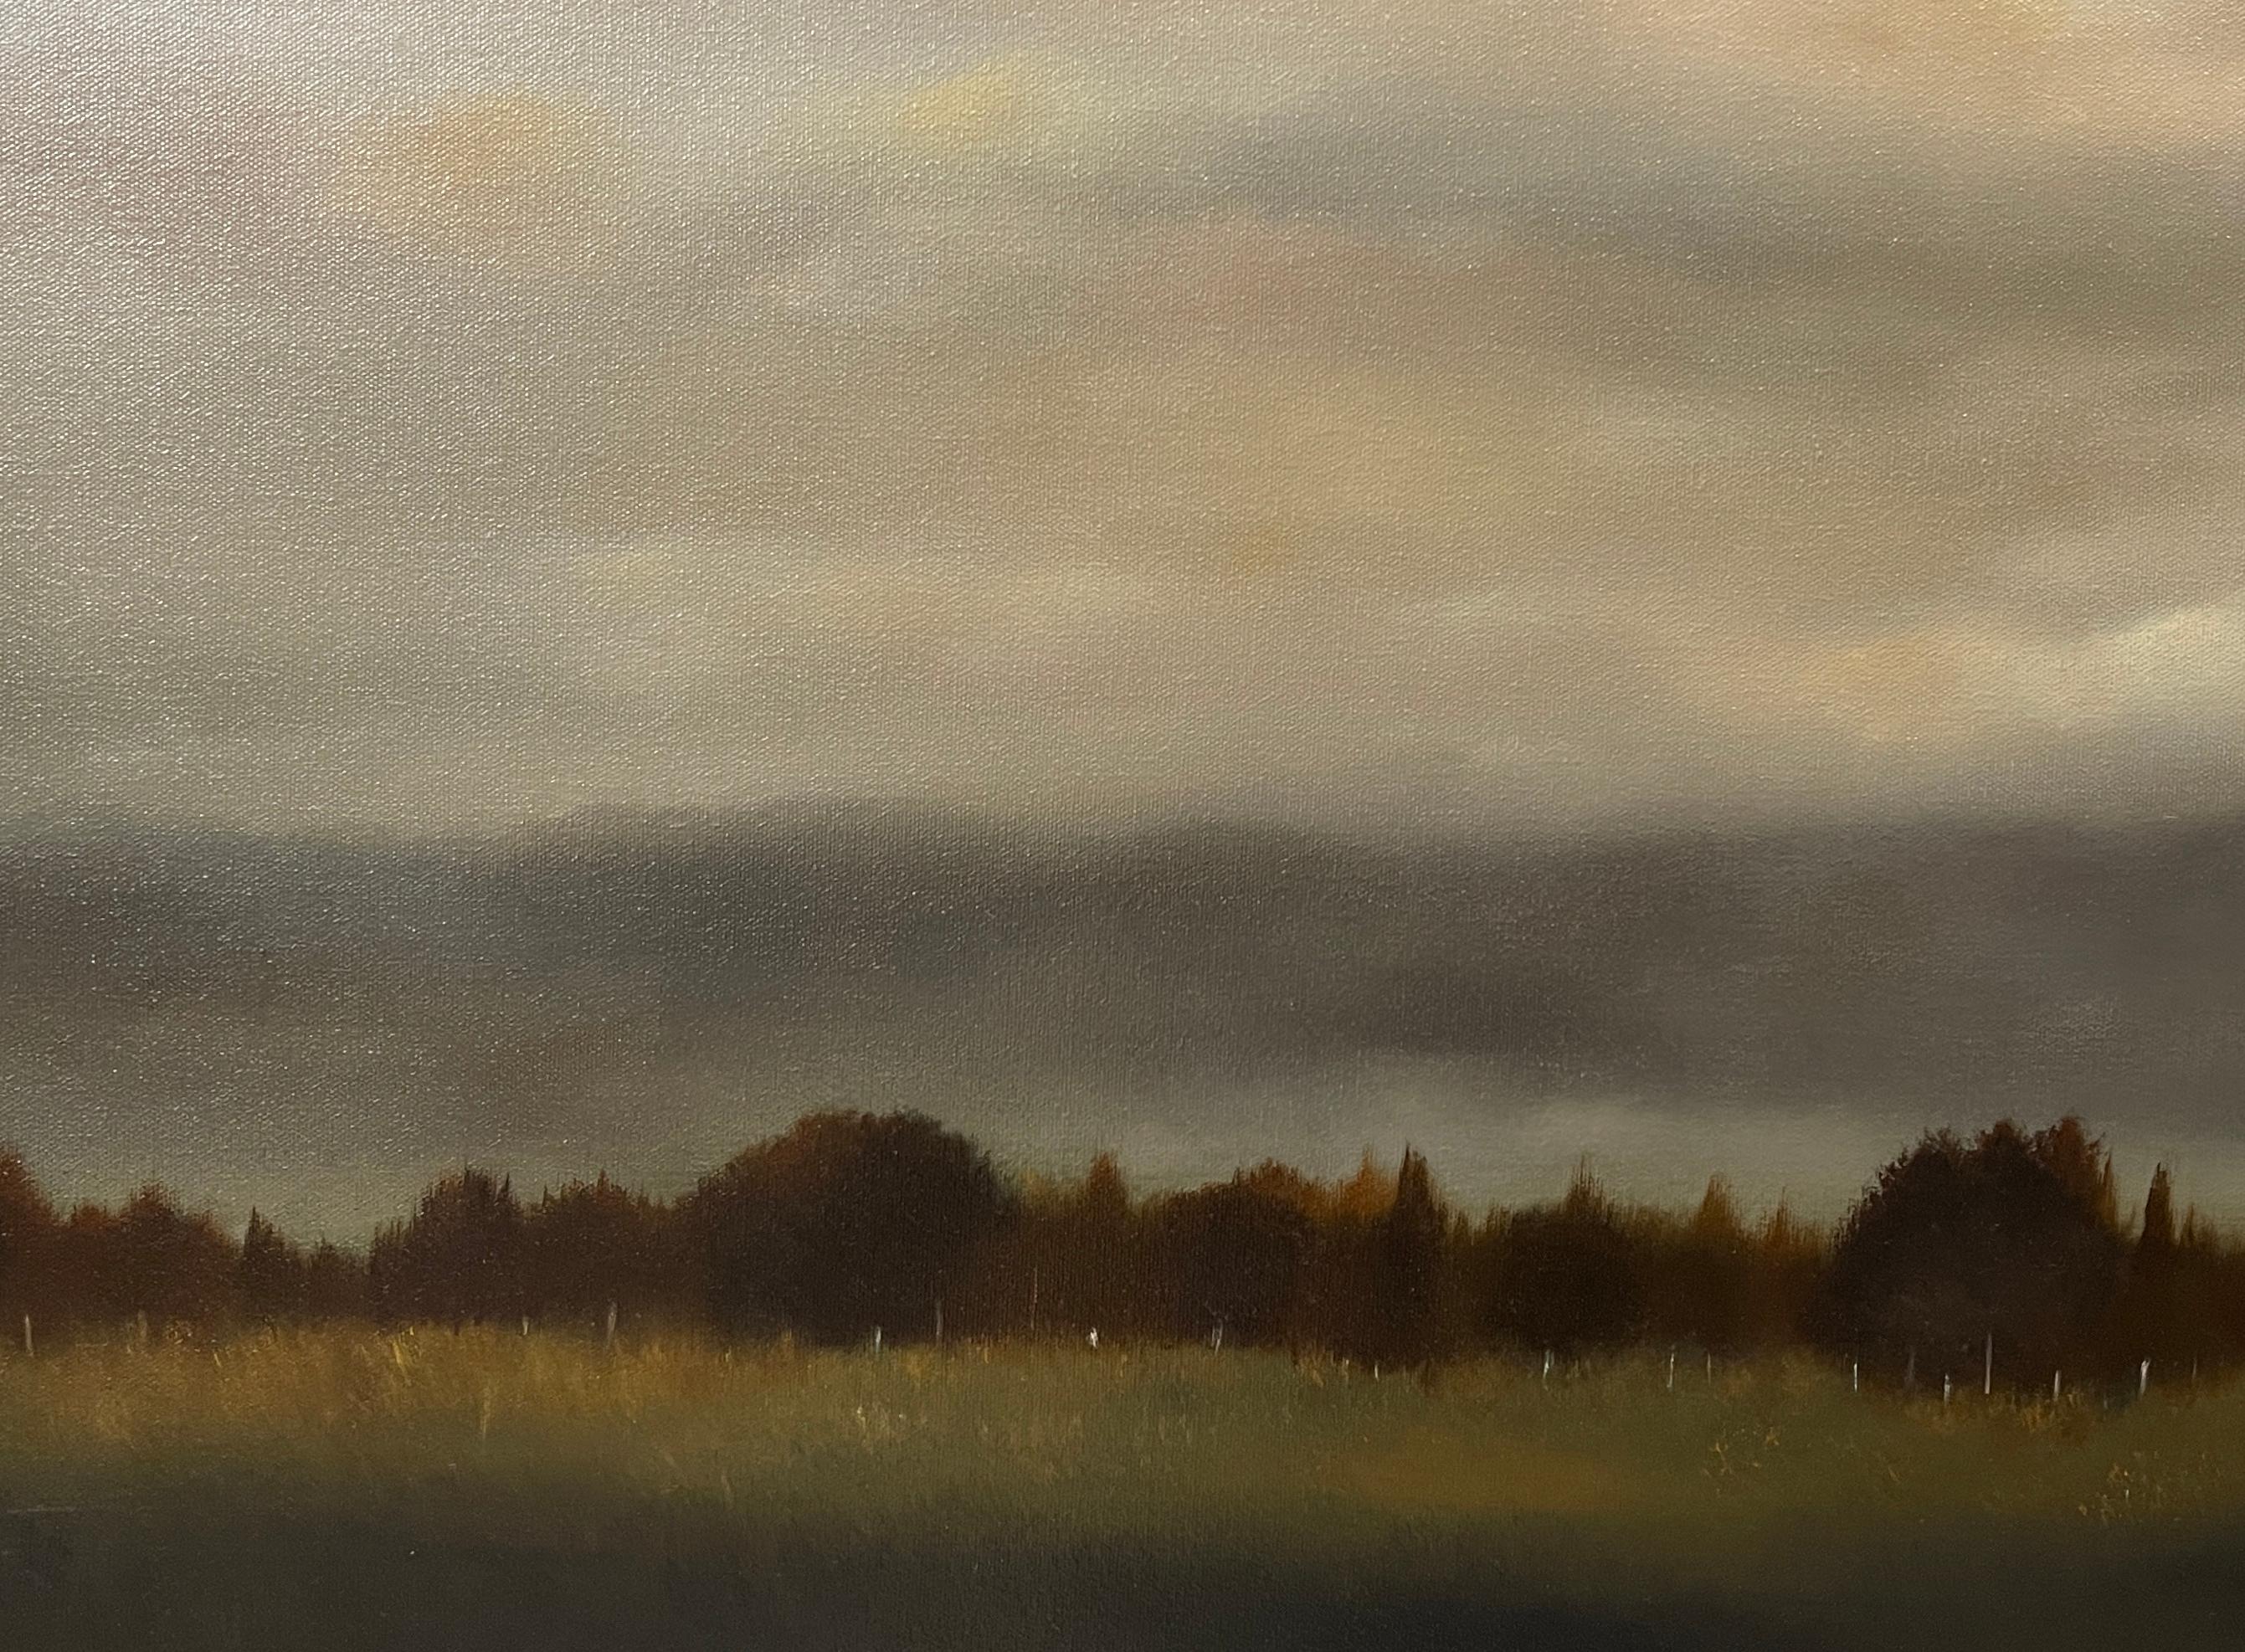 Meadow After the Rain - Serene Landscape with Expansive Stormy Sky - Contemporary Painting by Ahzad Bogosian